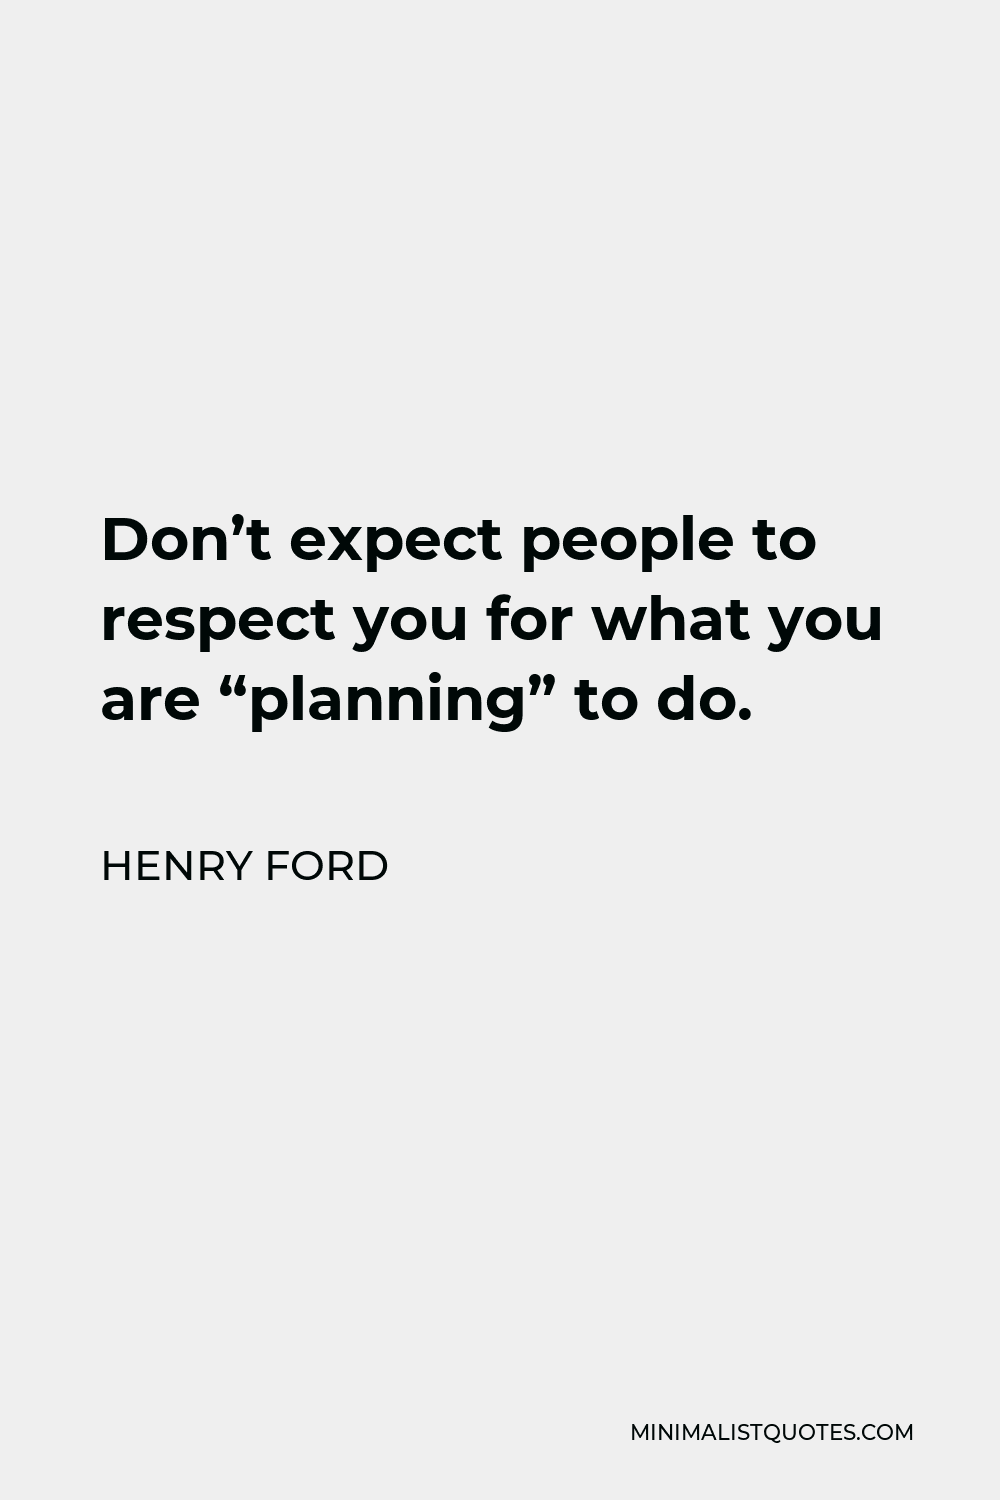 Henry Ford Quote - Don’t expect people to respect you for what you are “planning” to do.